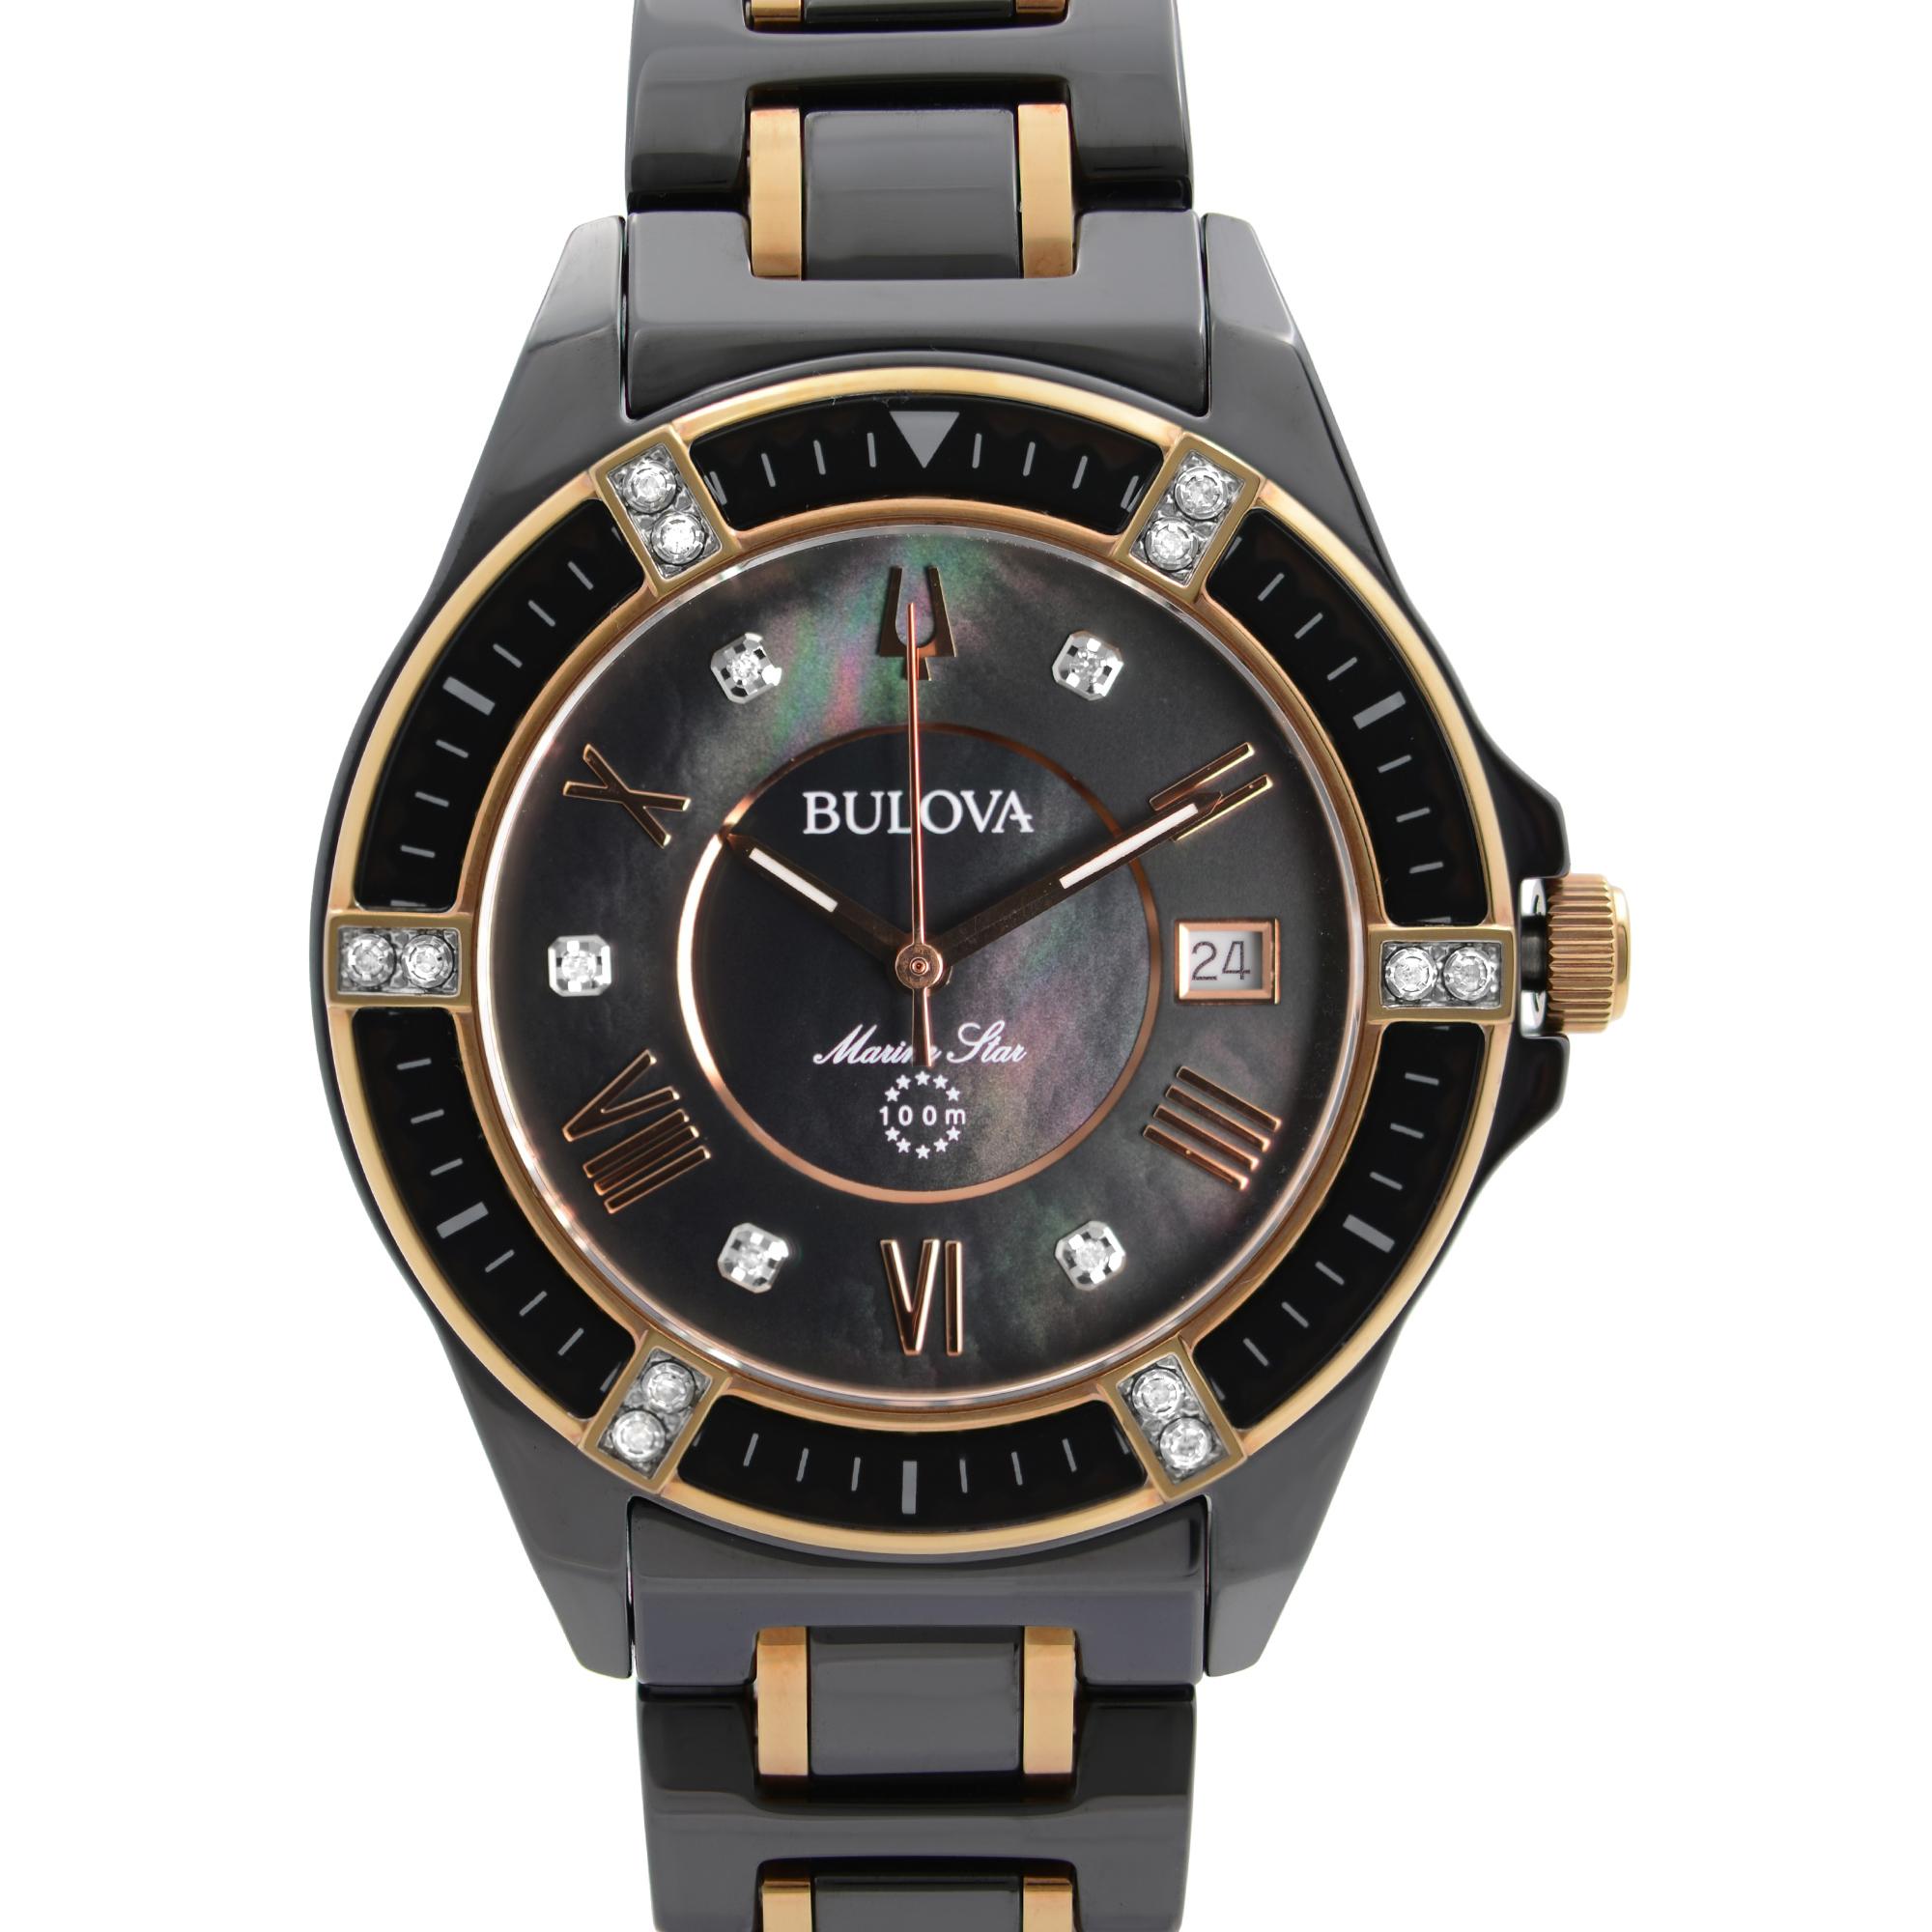 Display Model Bulova Marine Star Ladies Watch 98R242. The Watch has tiny marks on the case back and may have tiny marks on the rose gold parts on bracelet due to store handling. This Beautiful Timepiece Black Ion-Plated Ceramic Case with a Two-Tone